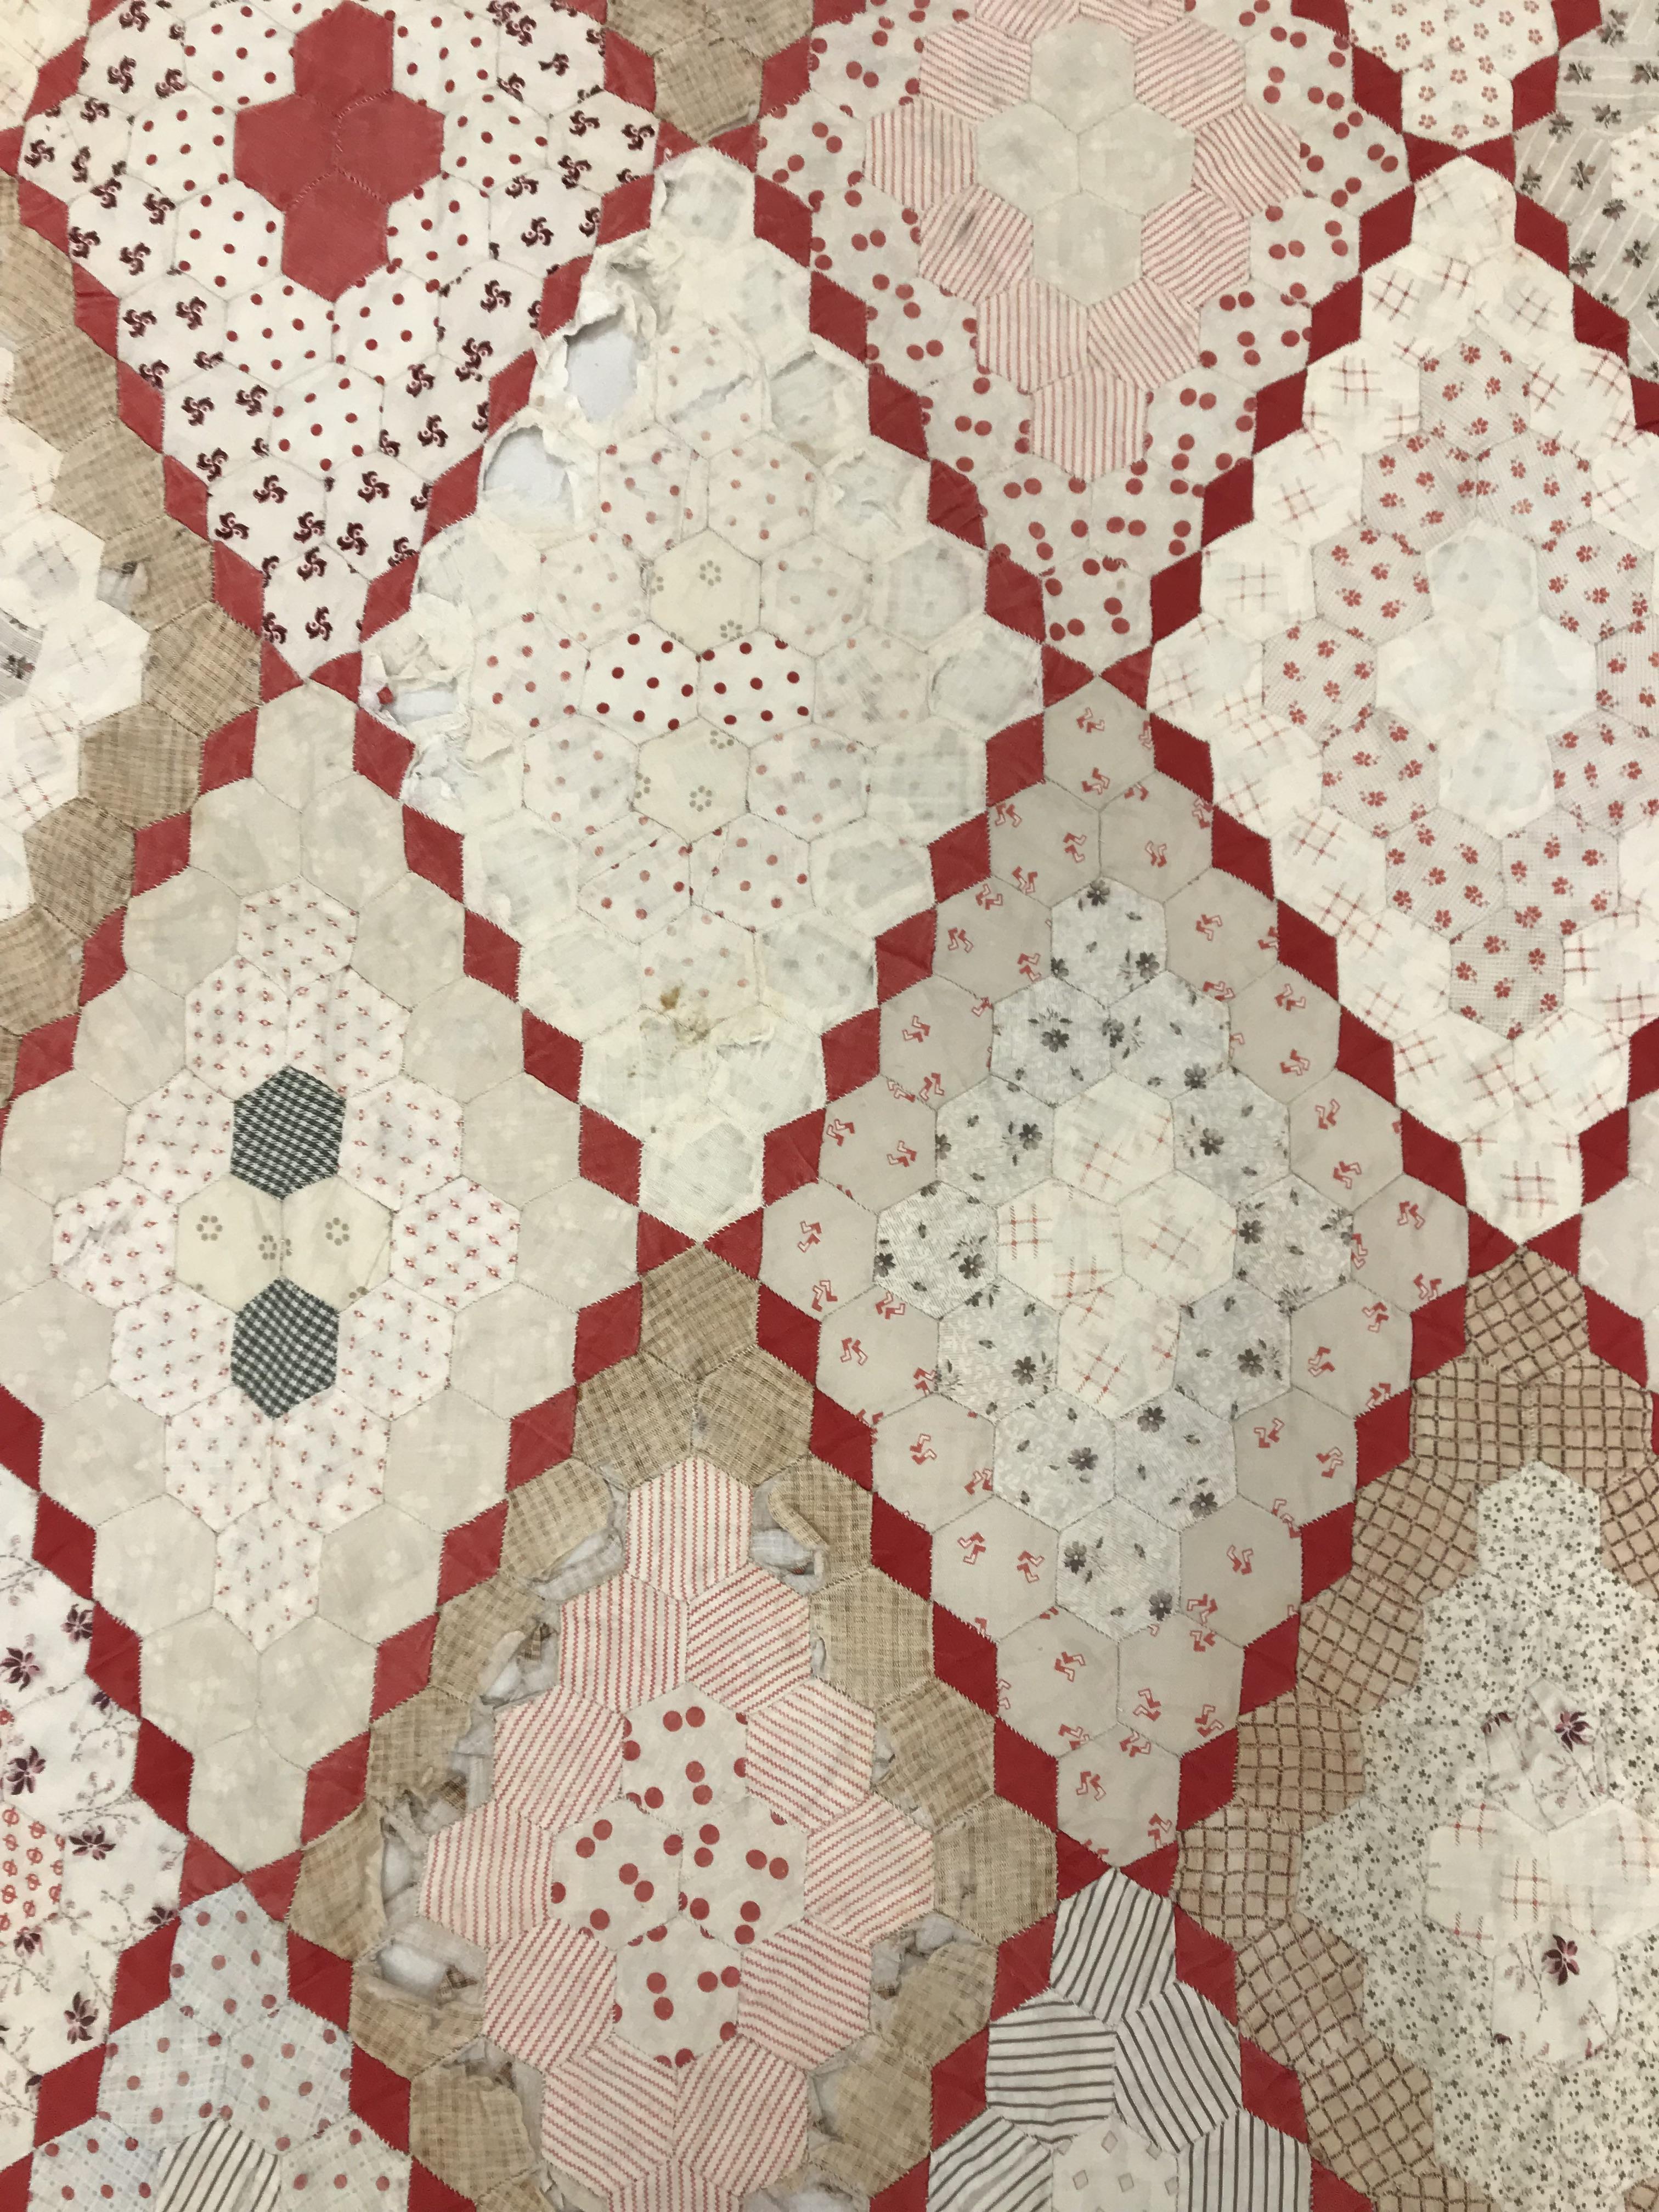 An early 20th Century hand-stitched, pieced quilt, backed with plain fabric and no wadding, - Image 7 of 36